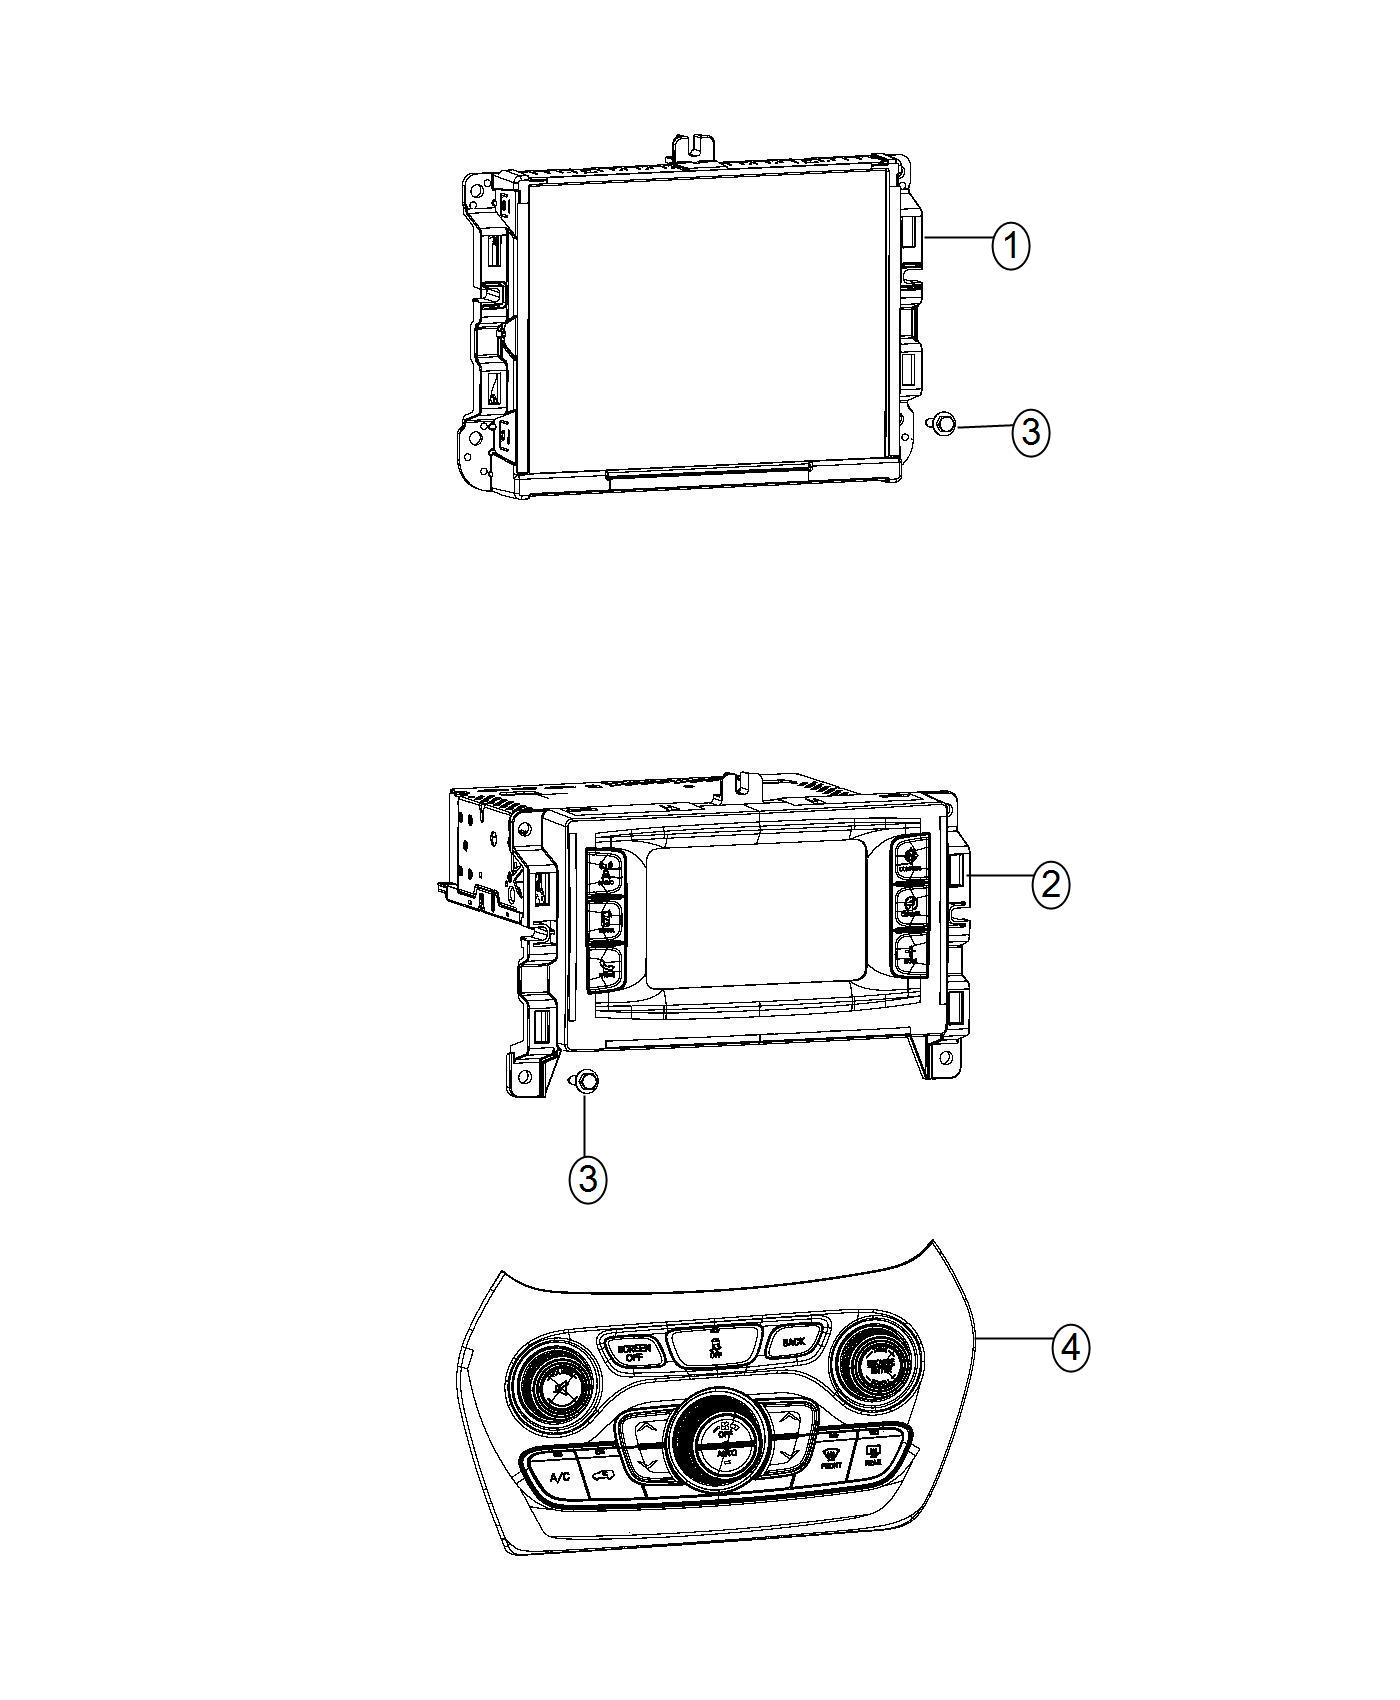 Radios and Center Stack. Diagram